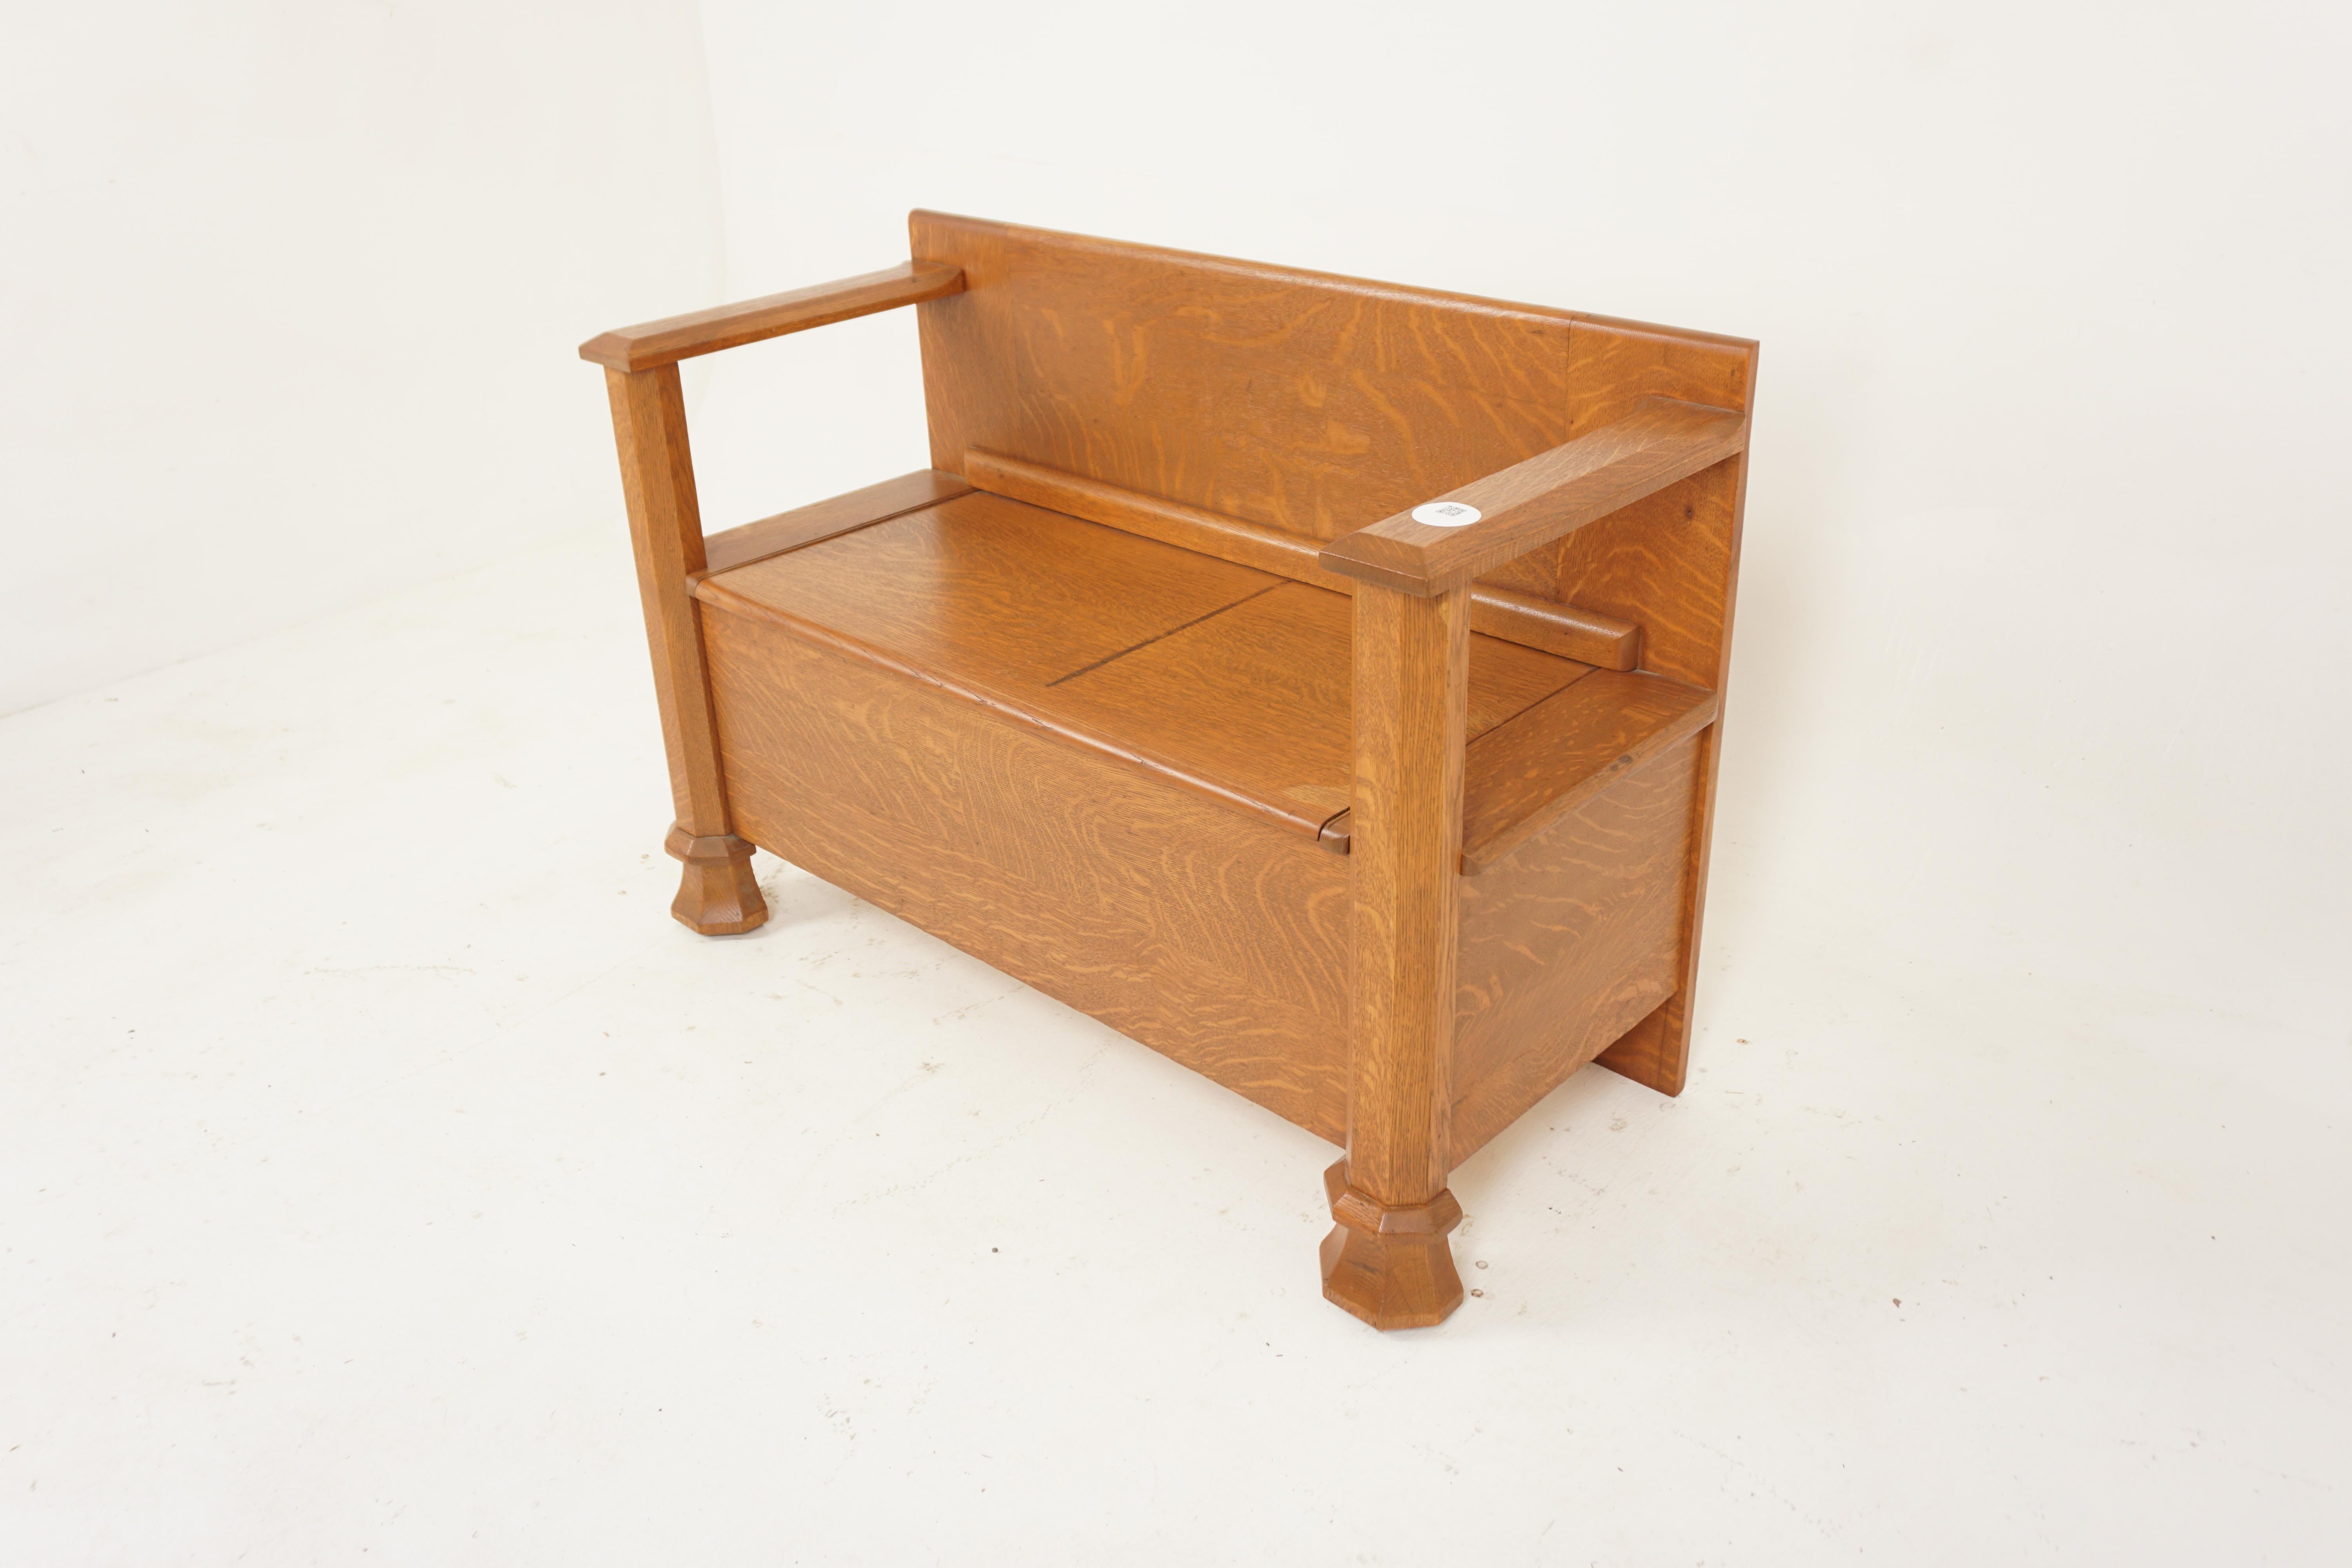 Arts + Crafts Tiger oak hall bench, lift up seat, Scotland 1910, H697

Scotland 1910
Solid Tiger Oak 
Original Finish 
Short Oak back
Pair of each arms are connected to half pillar supports
Lift up seat with lots of storage
All standing on shaped